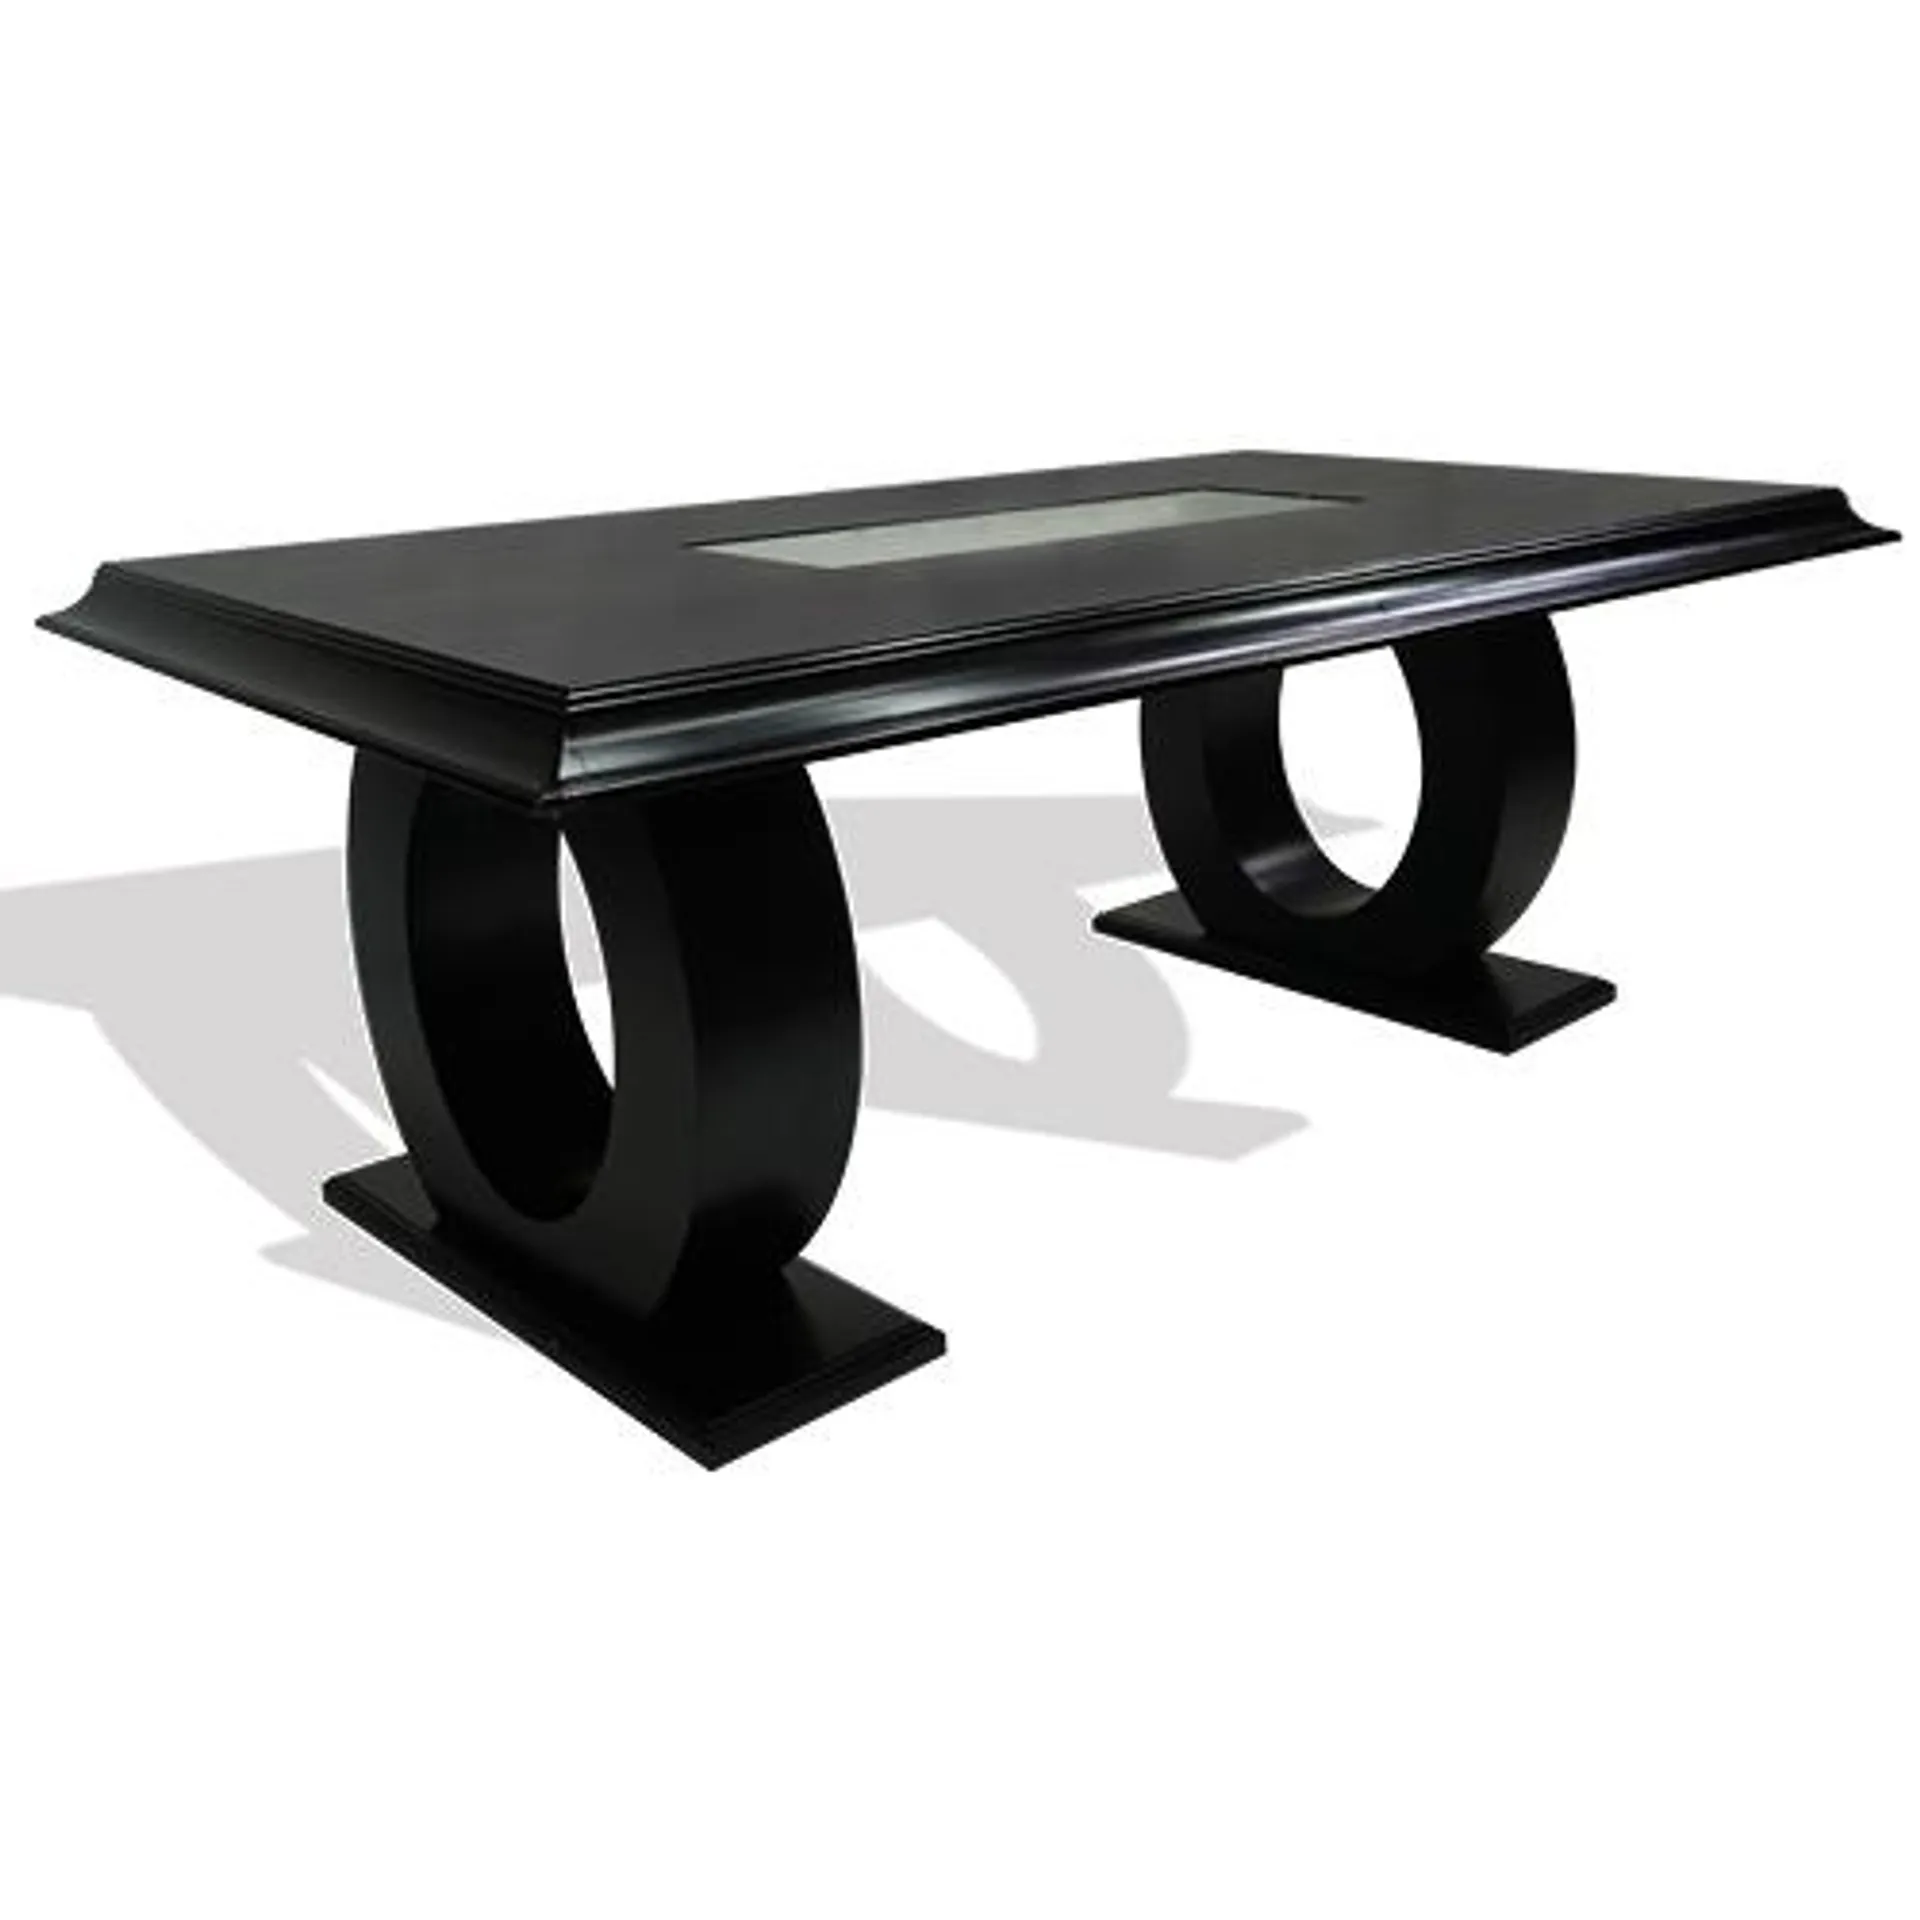 Avalon Dining Table 8 Seater